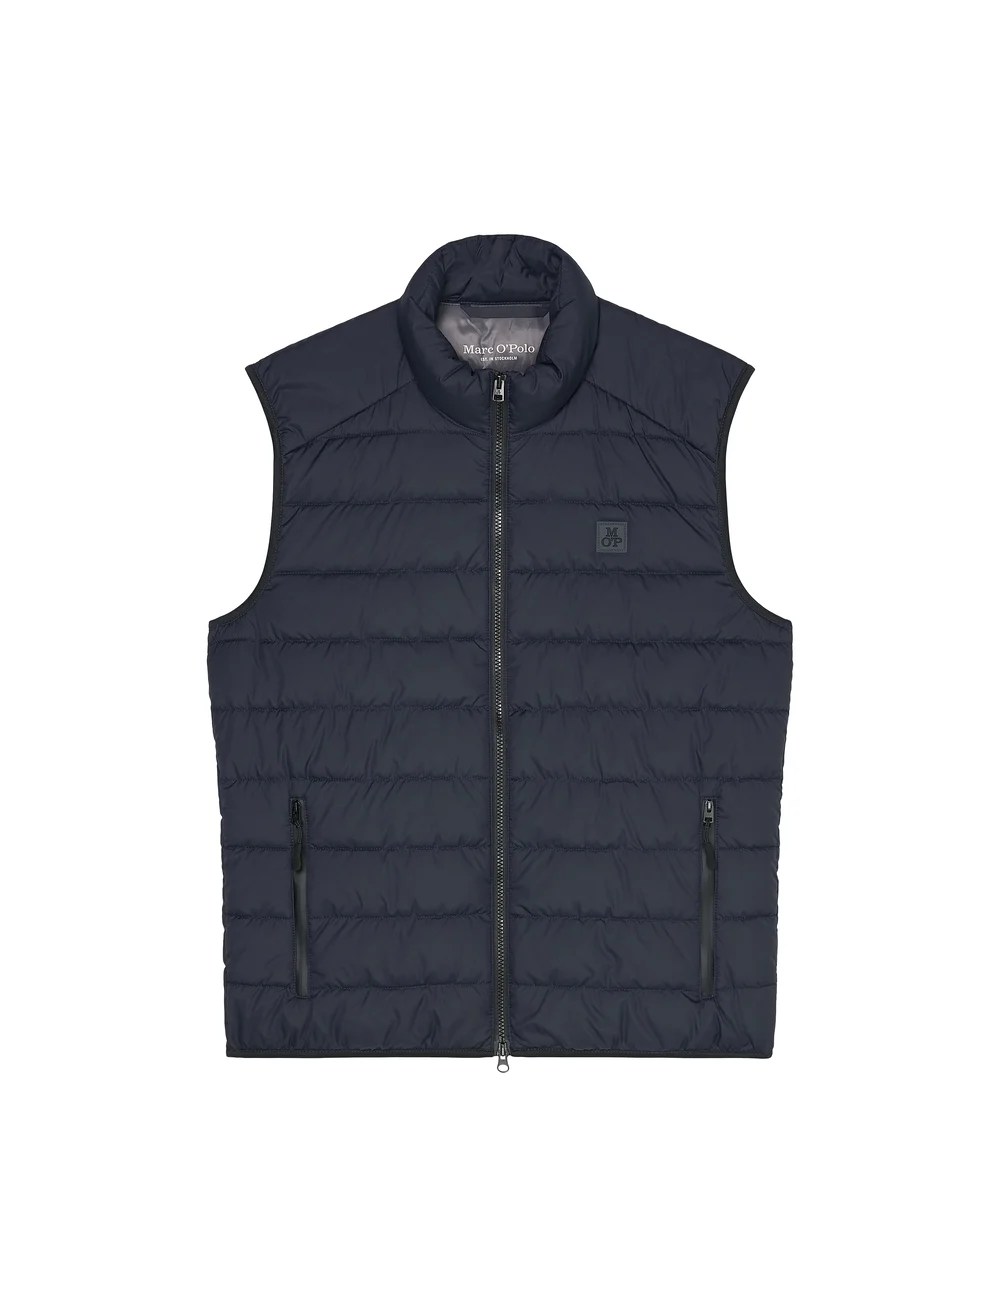 Marc O\'Polo Woven Outdoor Vests - 159.95 €. Buy Vests from Marc O\'Polo  online at Boozt.com. Fast delivery and easy returns